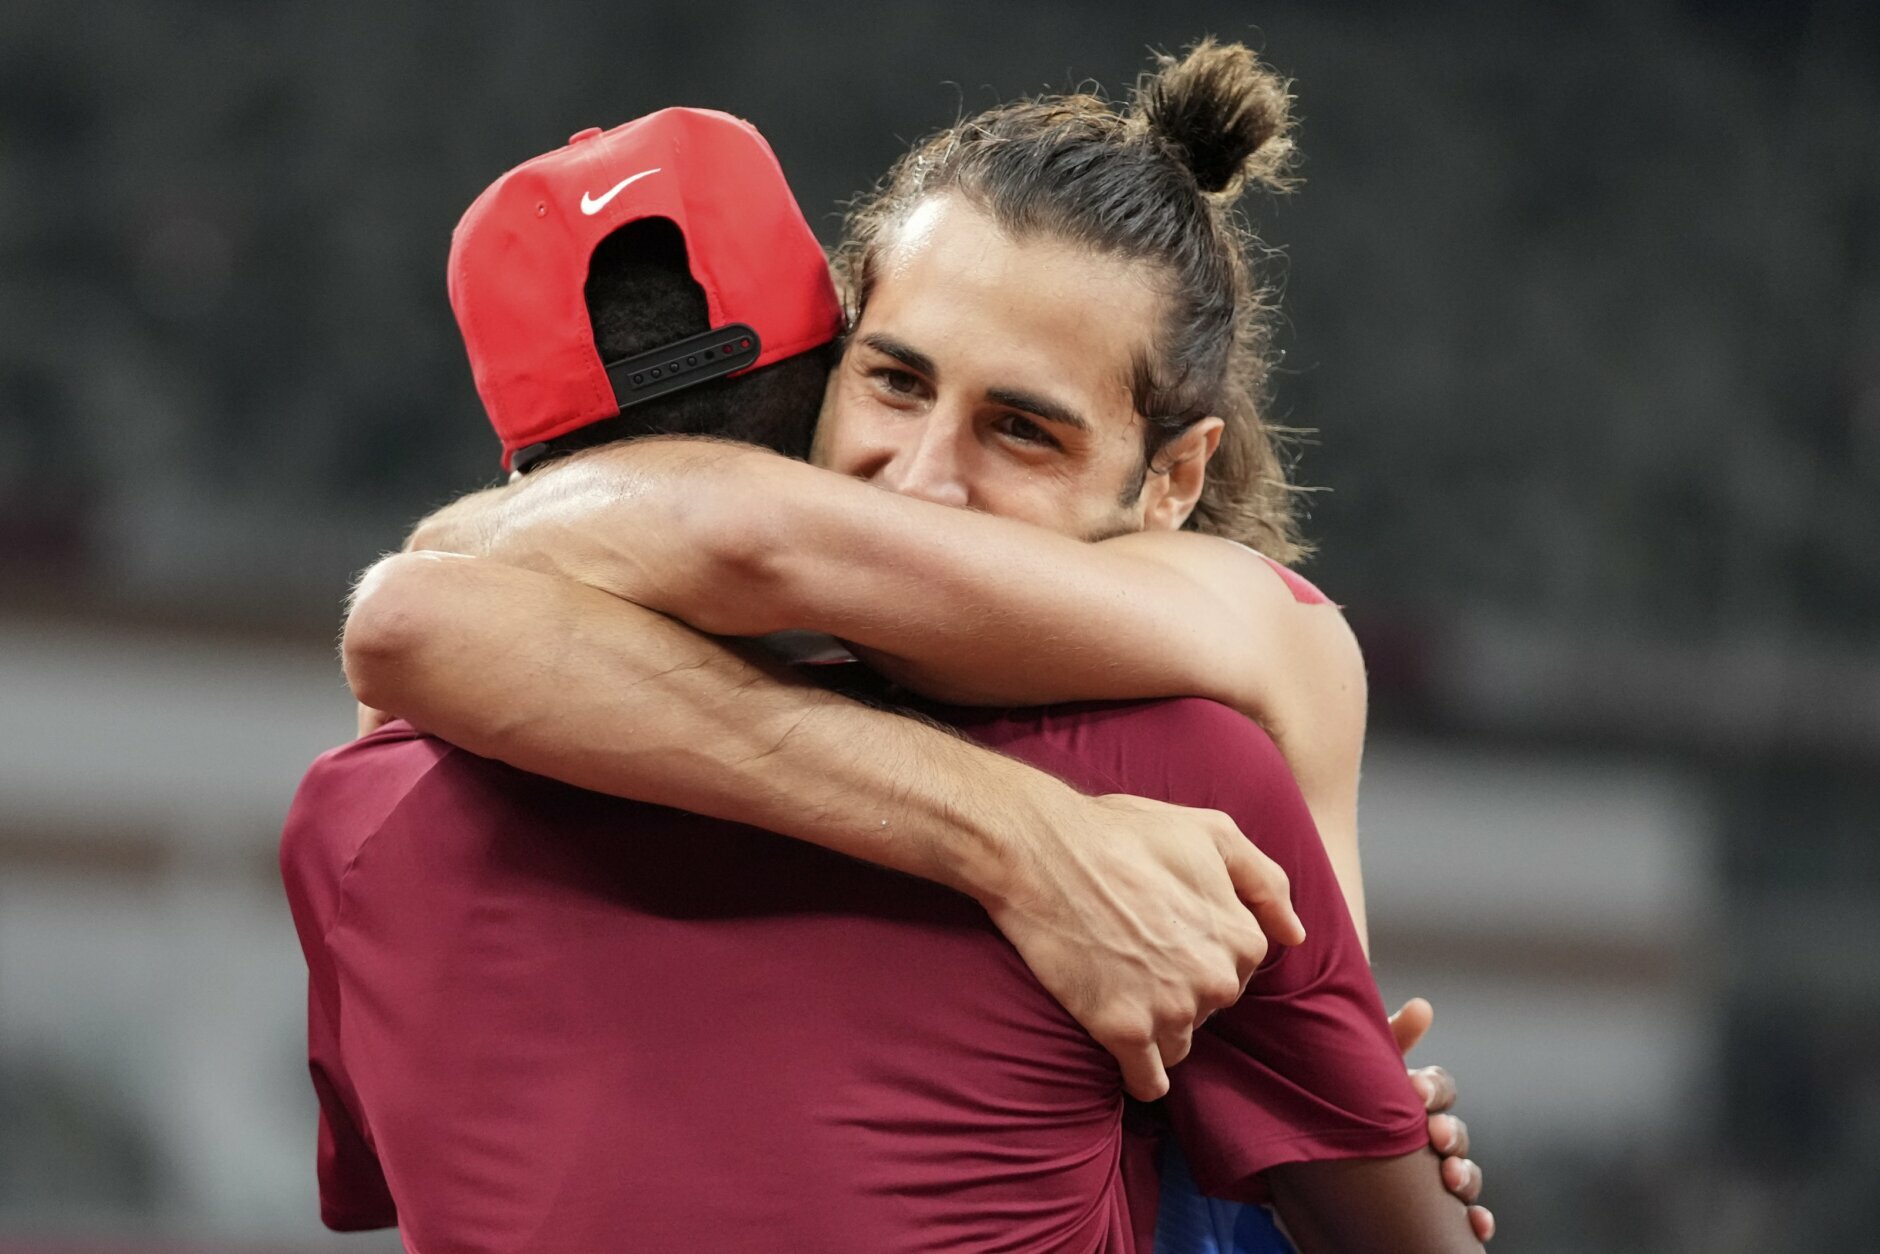 FILE - In this Aug. 1, 2021, file photo, Gianmarco Tamberi, of Italy, embraces fellow gold medalist Mutaz Barshim, of Qatar, after the final of the men's high jump at the 2020 Summer Olympics in Tokyo. In an extraordinary Olympic Games where mental health has been front and center, acts of kindness are everywhere. The world’s most competitive athletes have been captured showing gentleness and warmth to one another — celebrating, pep-talking, wiping away each another’s tears of disappointment.  (AP Photo/Matthias Schrader, File)